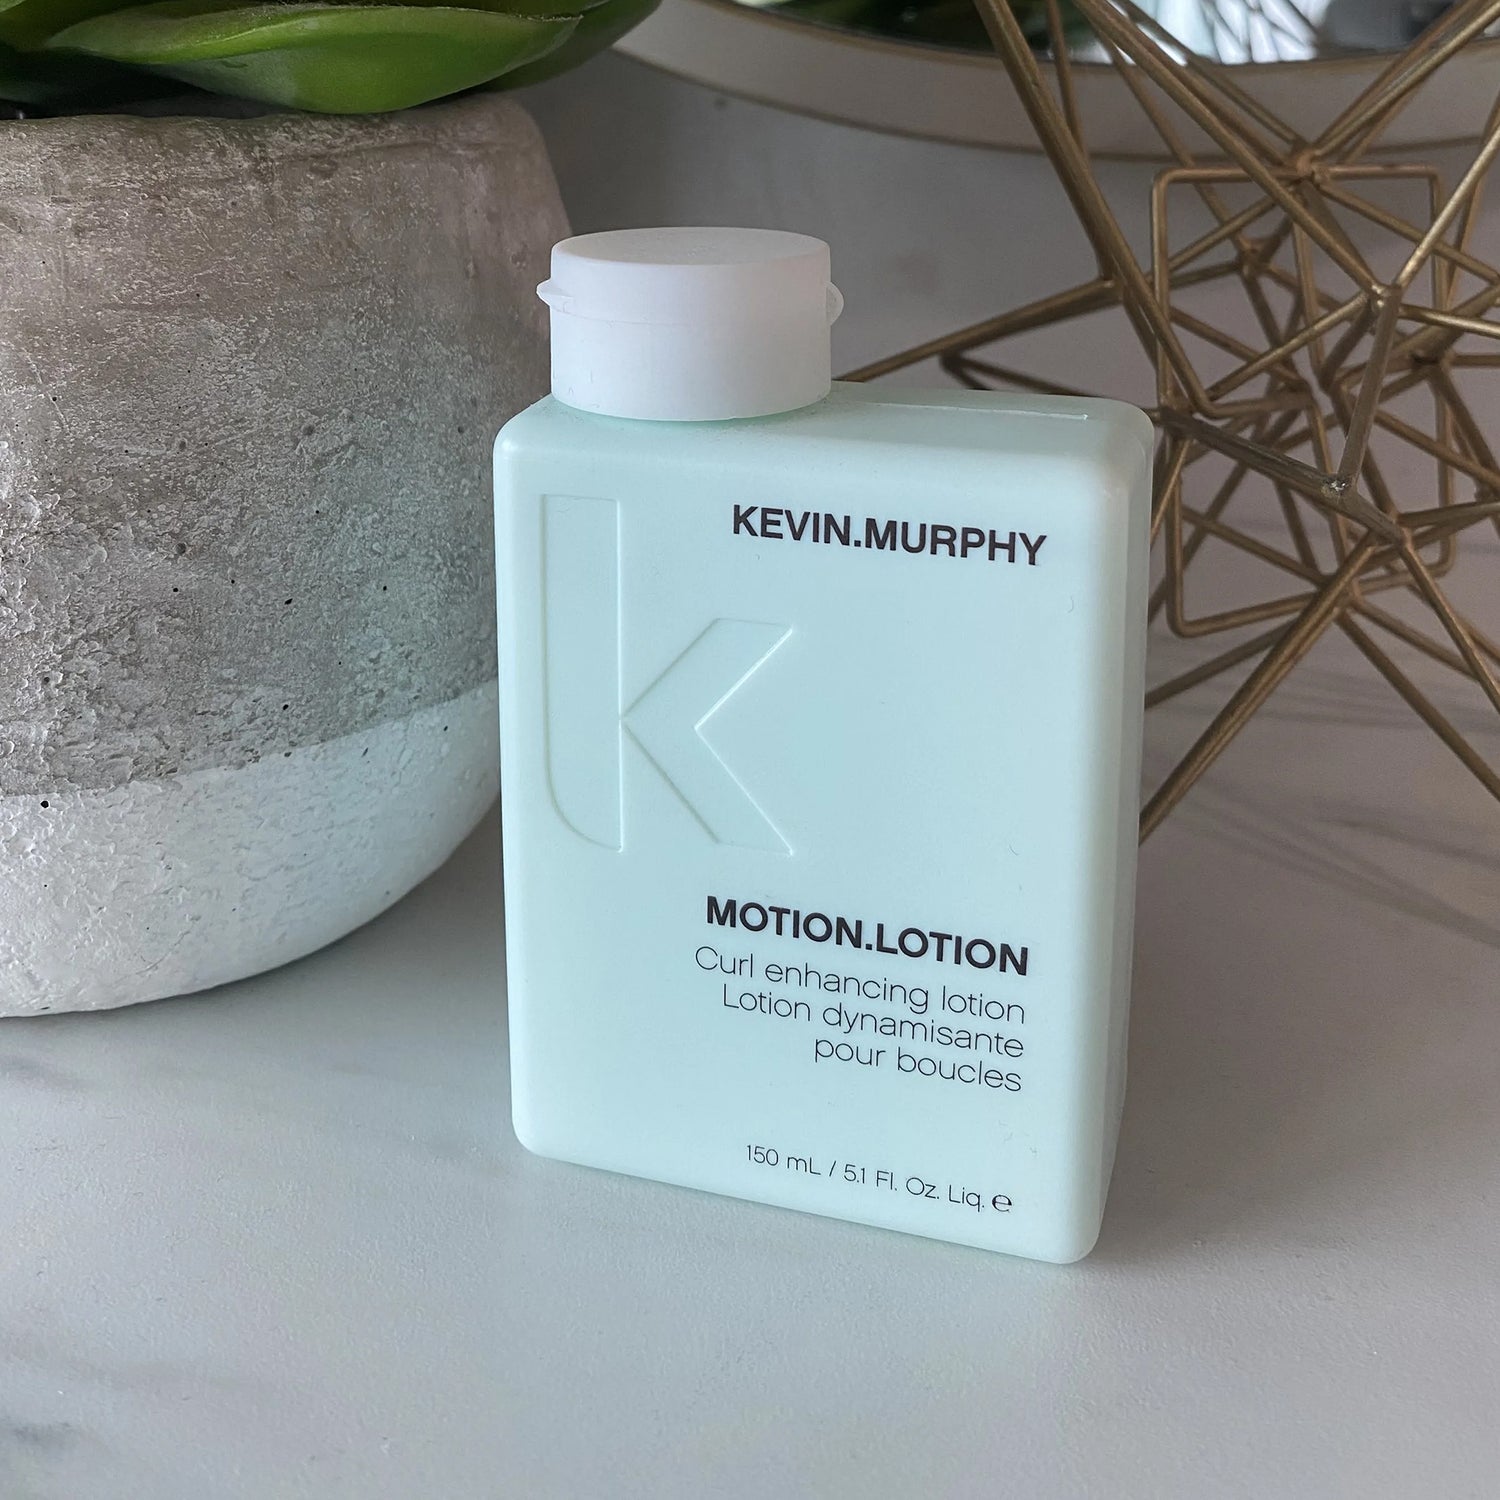 Motion.Lotion Curl Enhancing Lotion